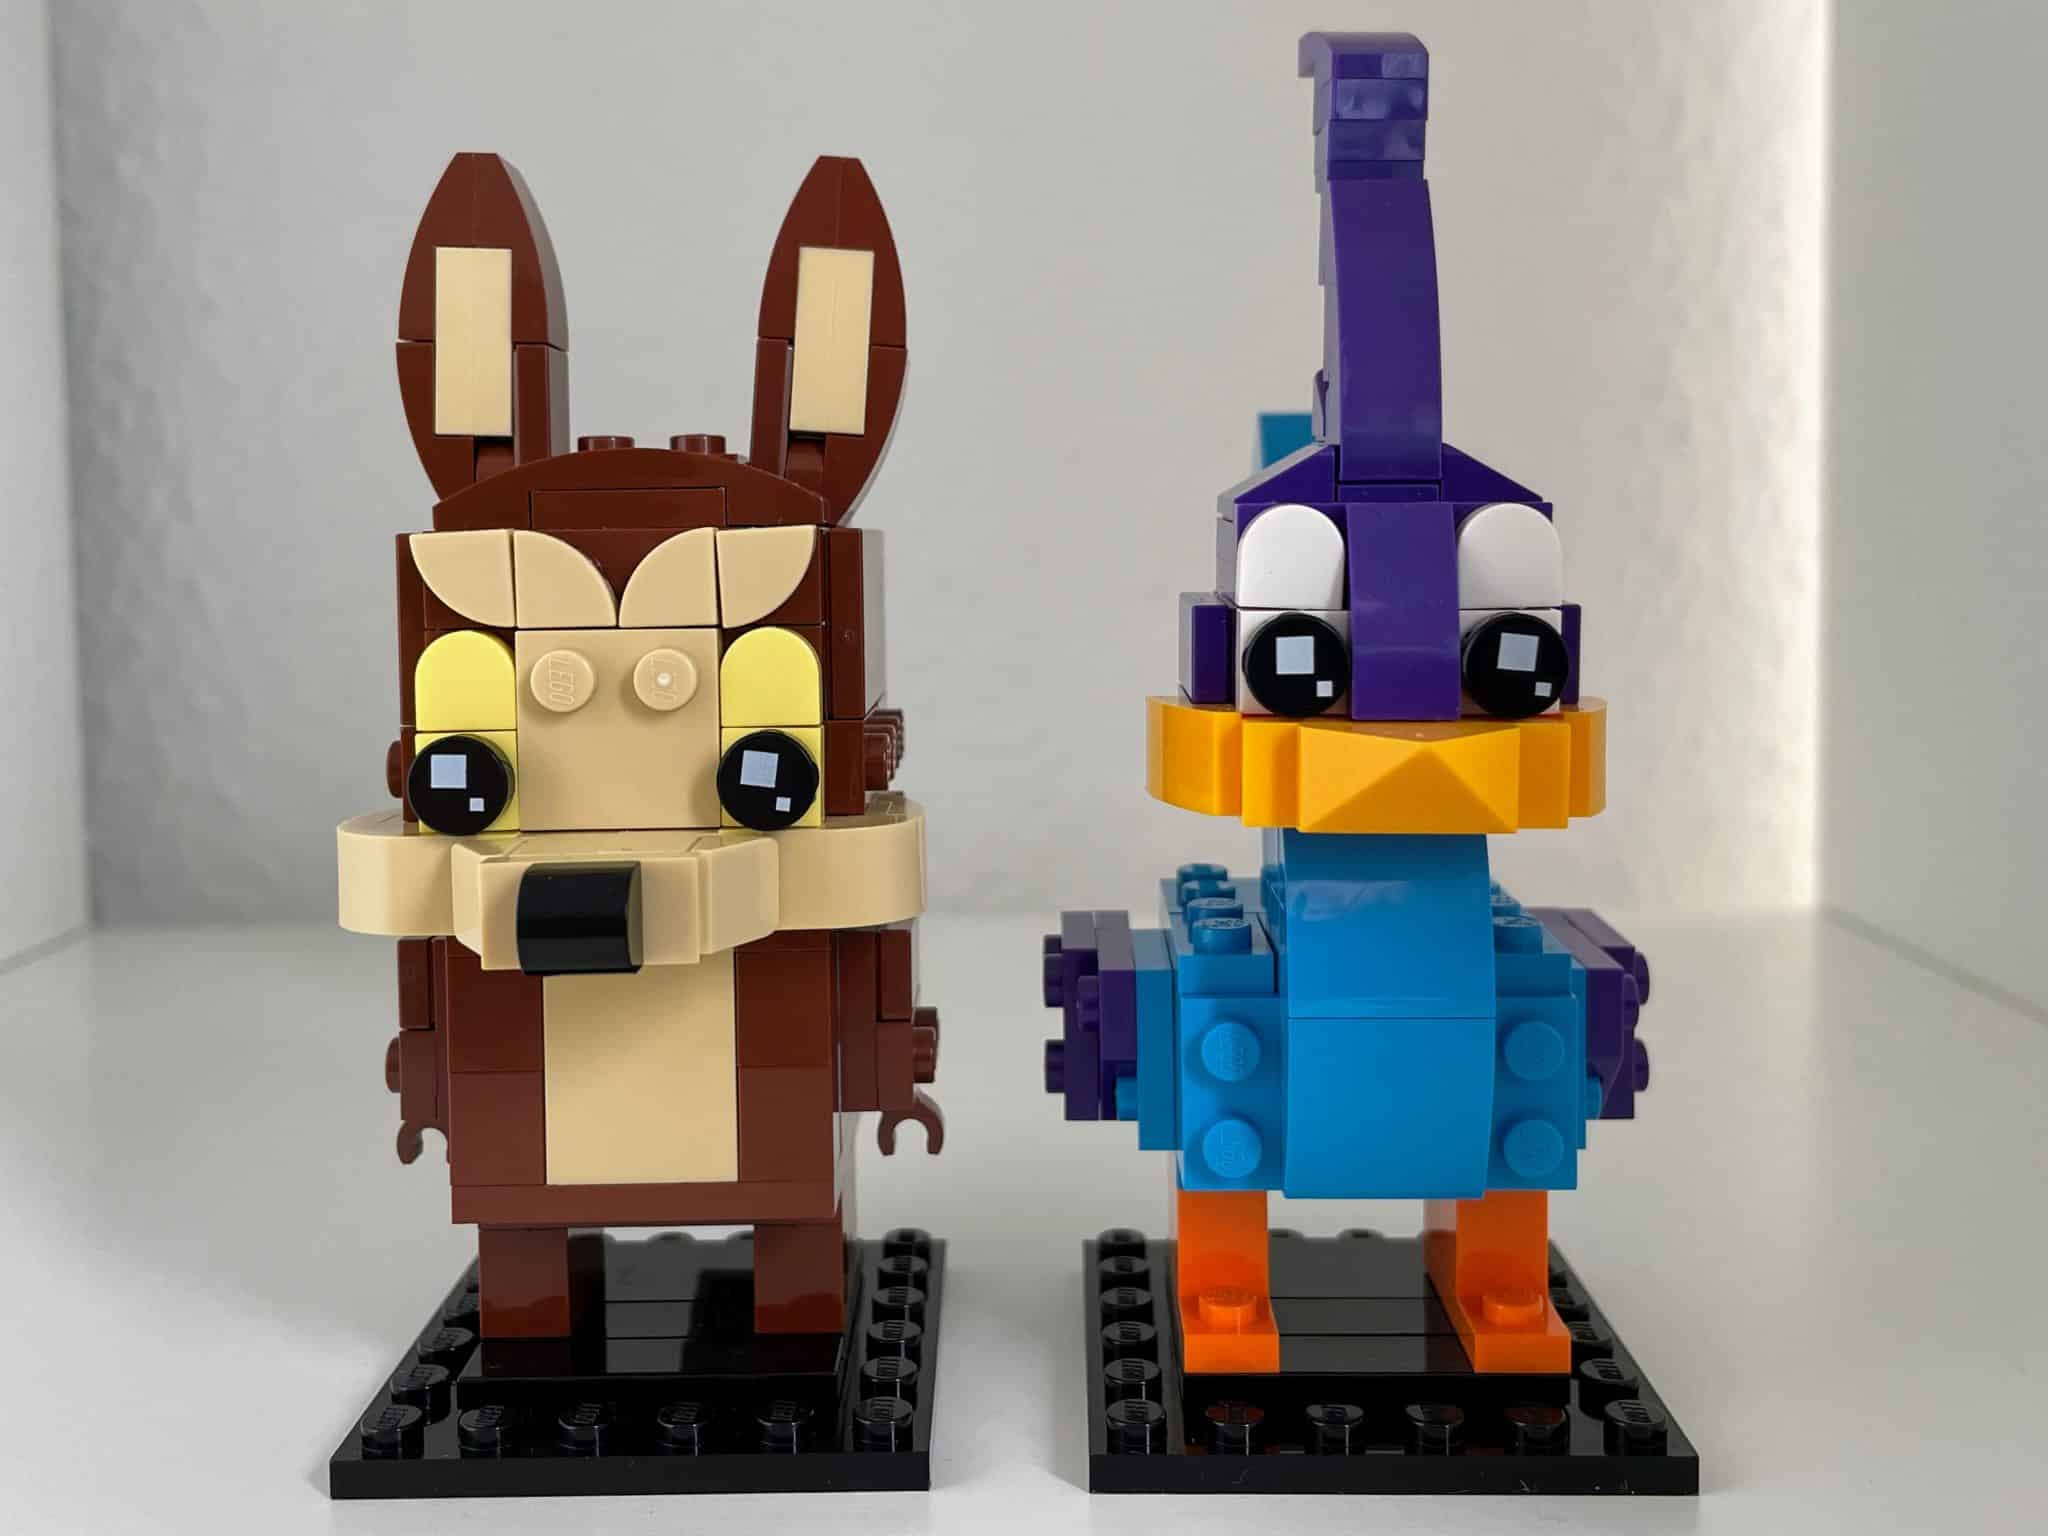 LEGO Road Runner & Wile E. Coyote